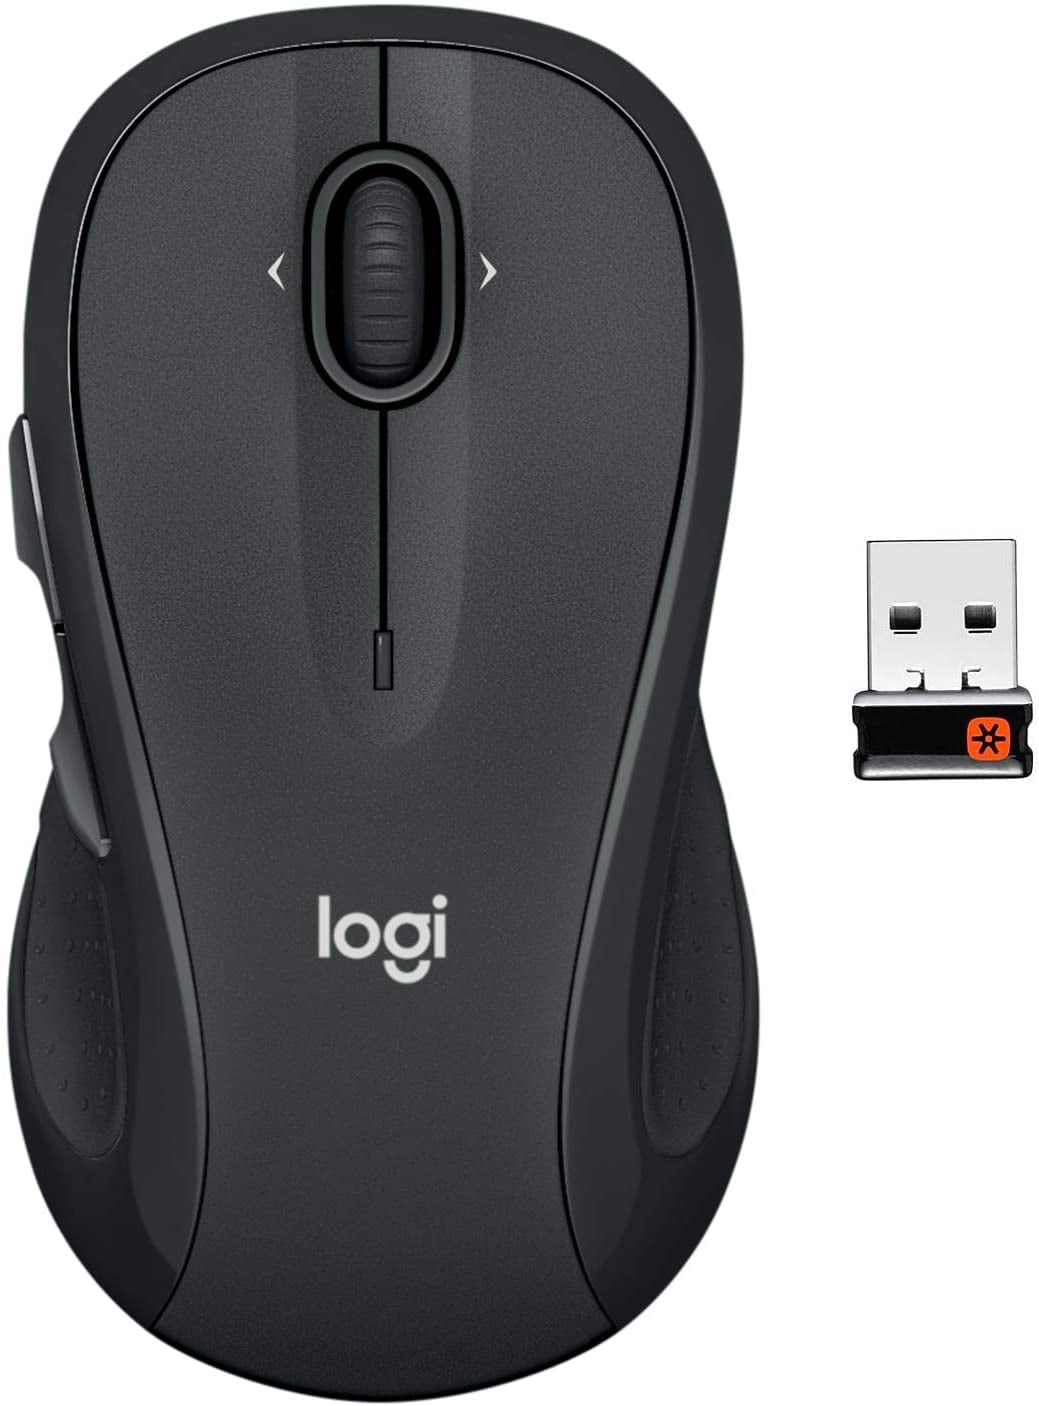 Logitech M510 Wireless Computer Mouse – Shape with USB Unifying Receiver, with Back/Forward Buttons and Side-to-Side Scrolling, Dark [Non-Retail Packaging] - Walmart.com